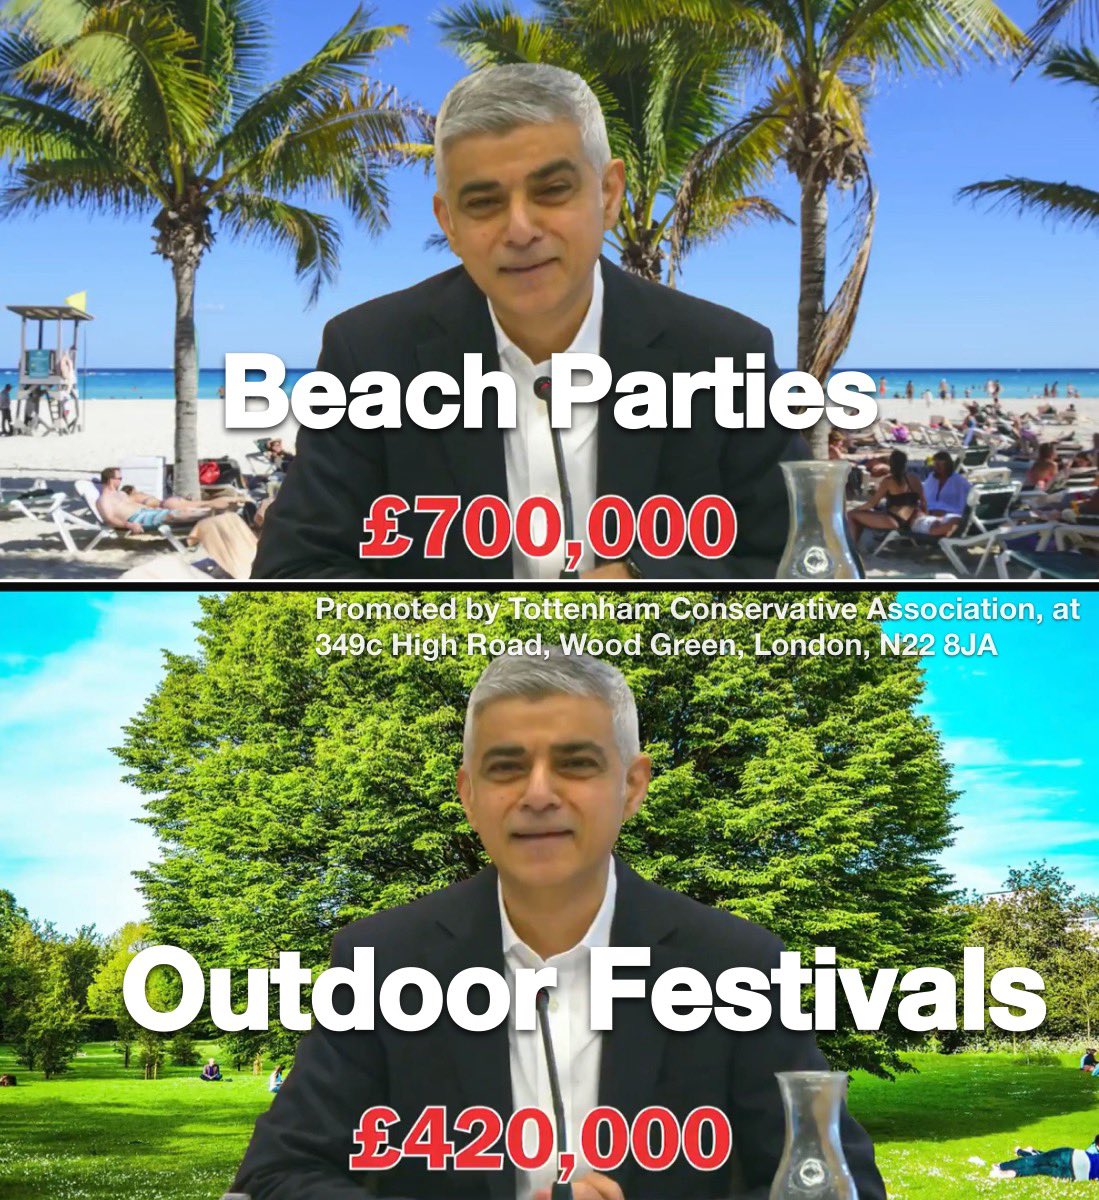 Sadiq Khan has increased council tax by 71% since 2016. What has he spent it on? 🔴£700K on beach parties 🔴£450K on outdoor festivals Stop Khan wasting your money. Vote Susan Hall for Mayor, Vote Calum McGillivray for GLA, #VoteConservative 2nd May.